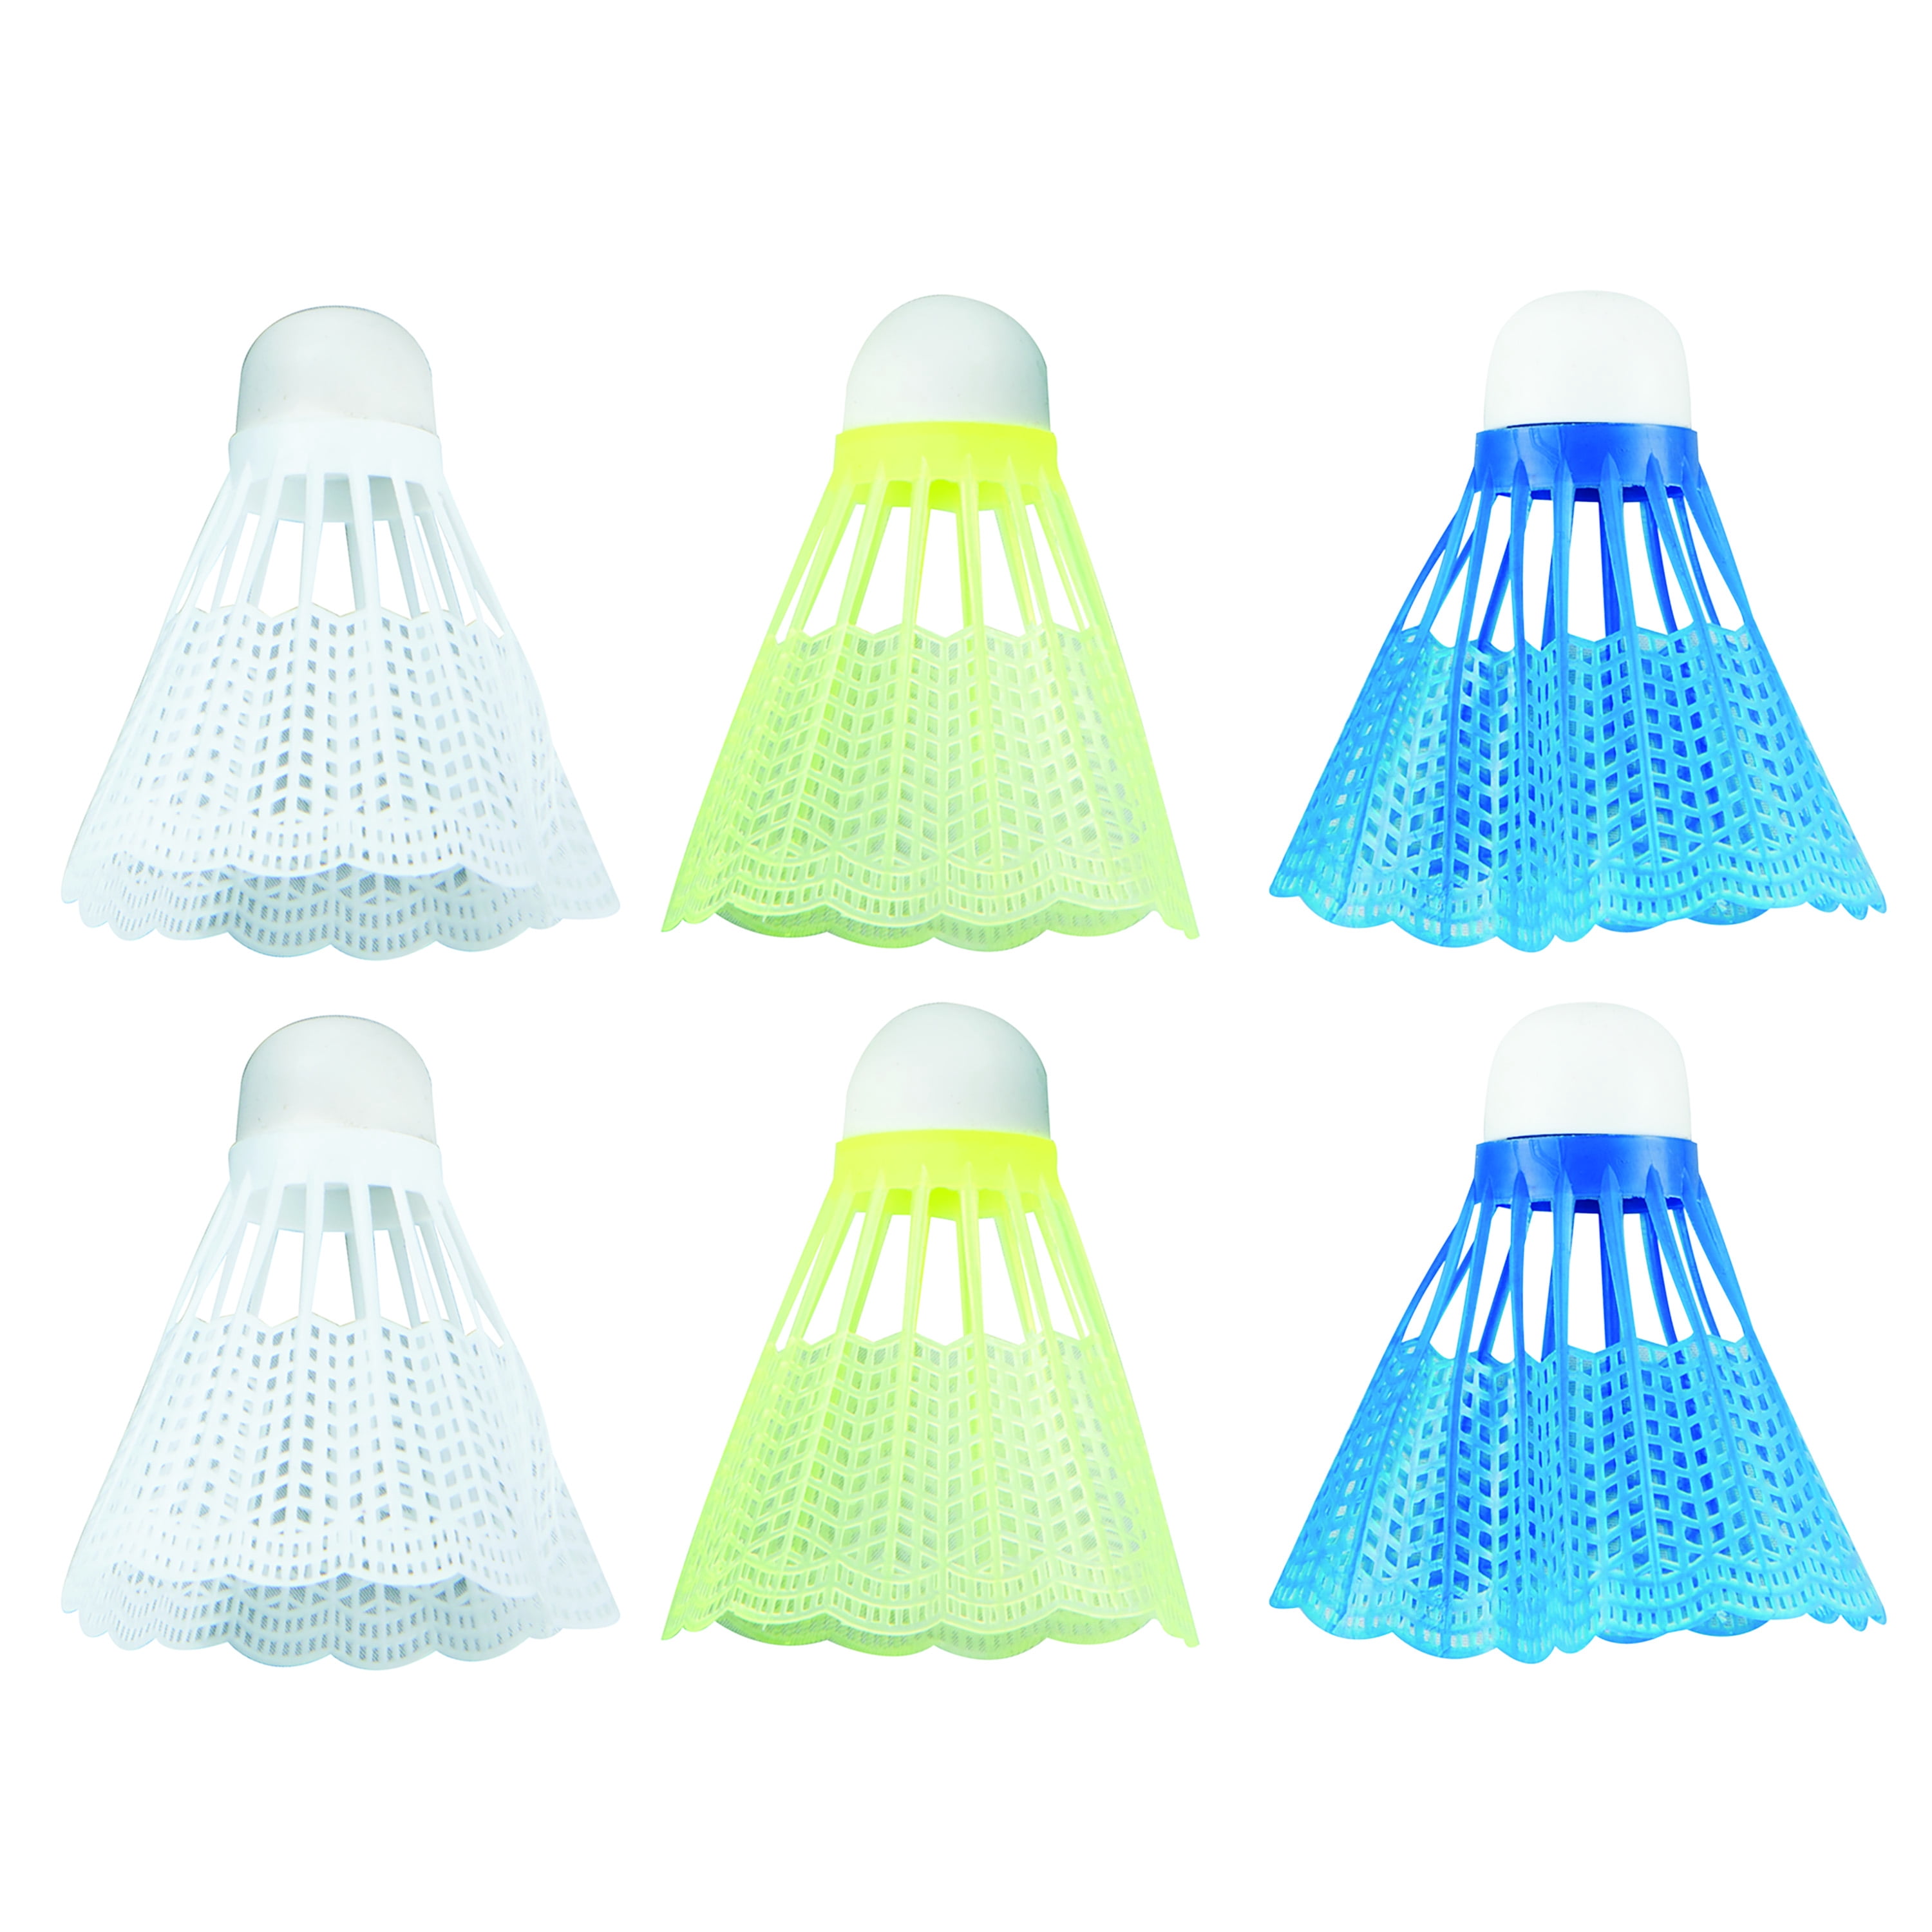 6 Pack Colorful Plastic Badminton Ball Shuttlecock Durable Sports Training US 